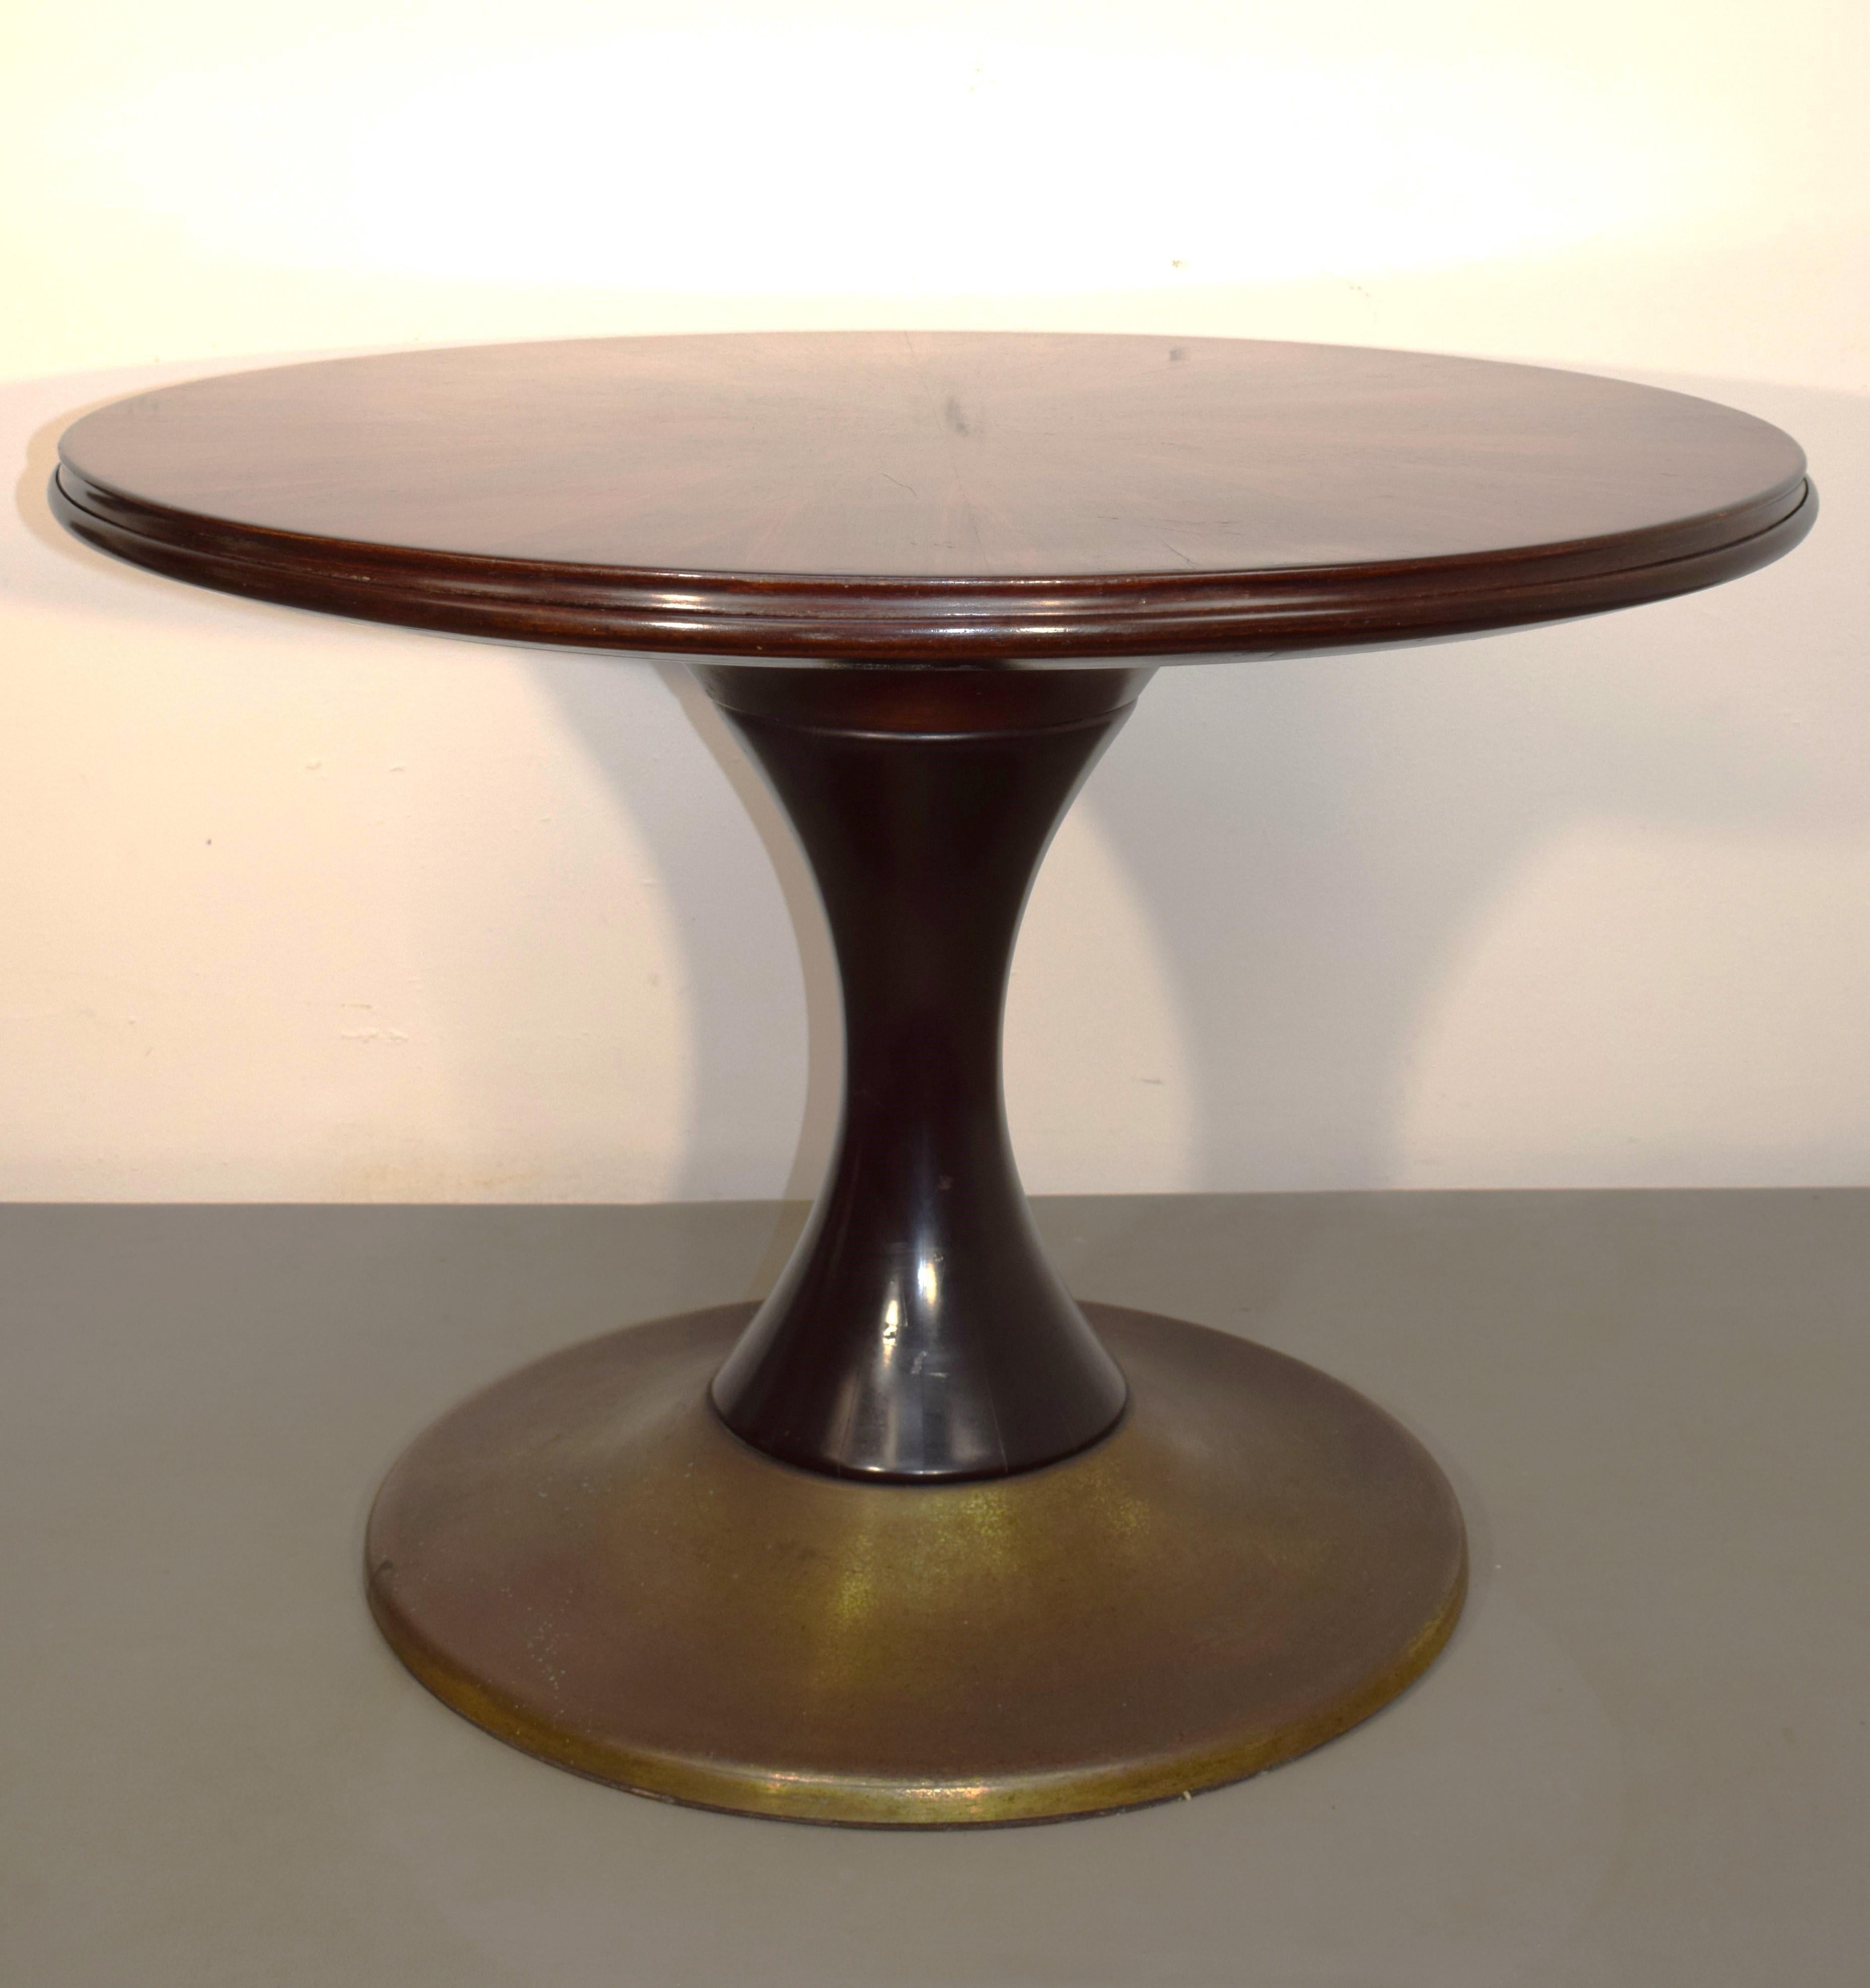 Italian round table, reversible table, 1960s.

Dimensions: H= 70 cm; D= 101 cm.